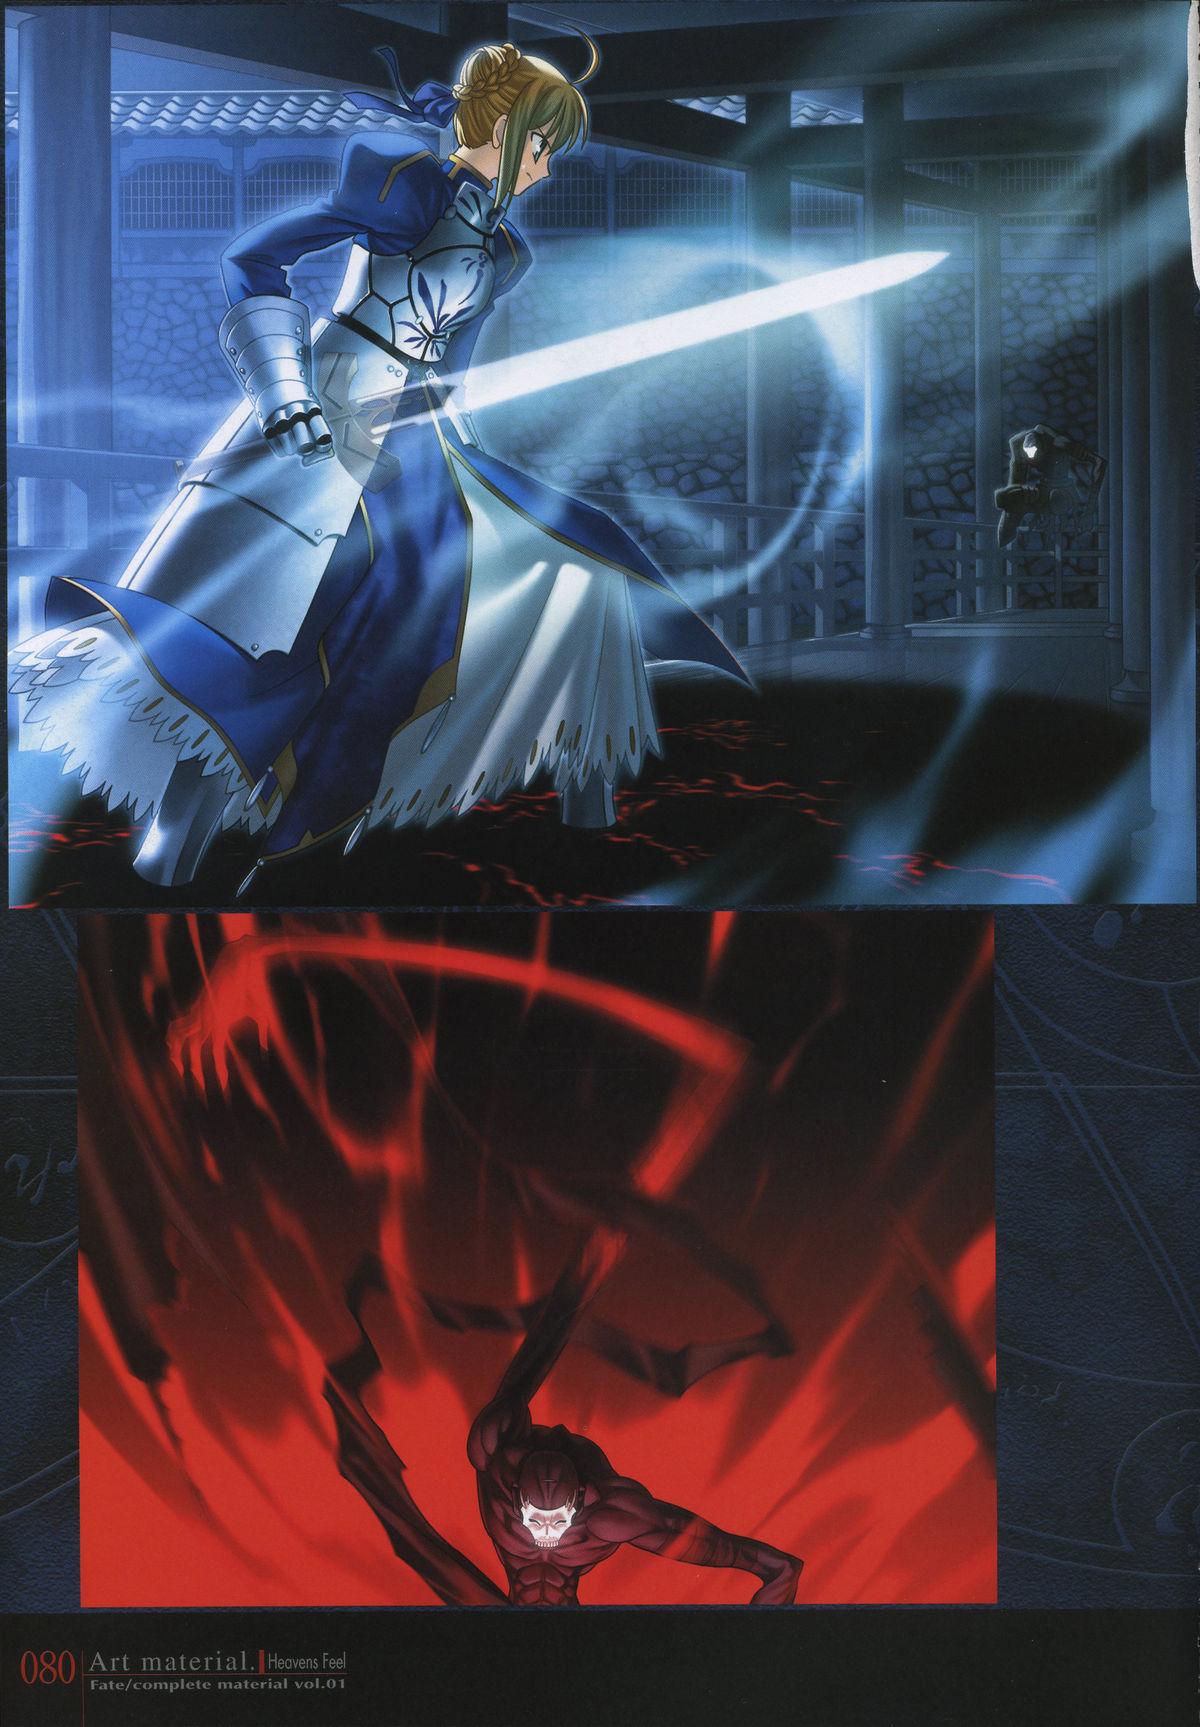 Fate/complete material I - Art material. 84